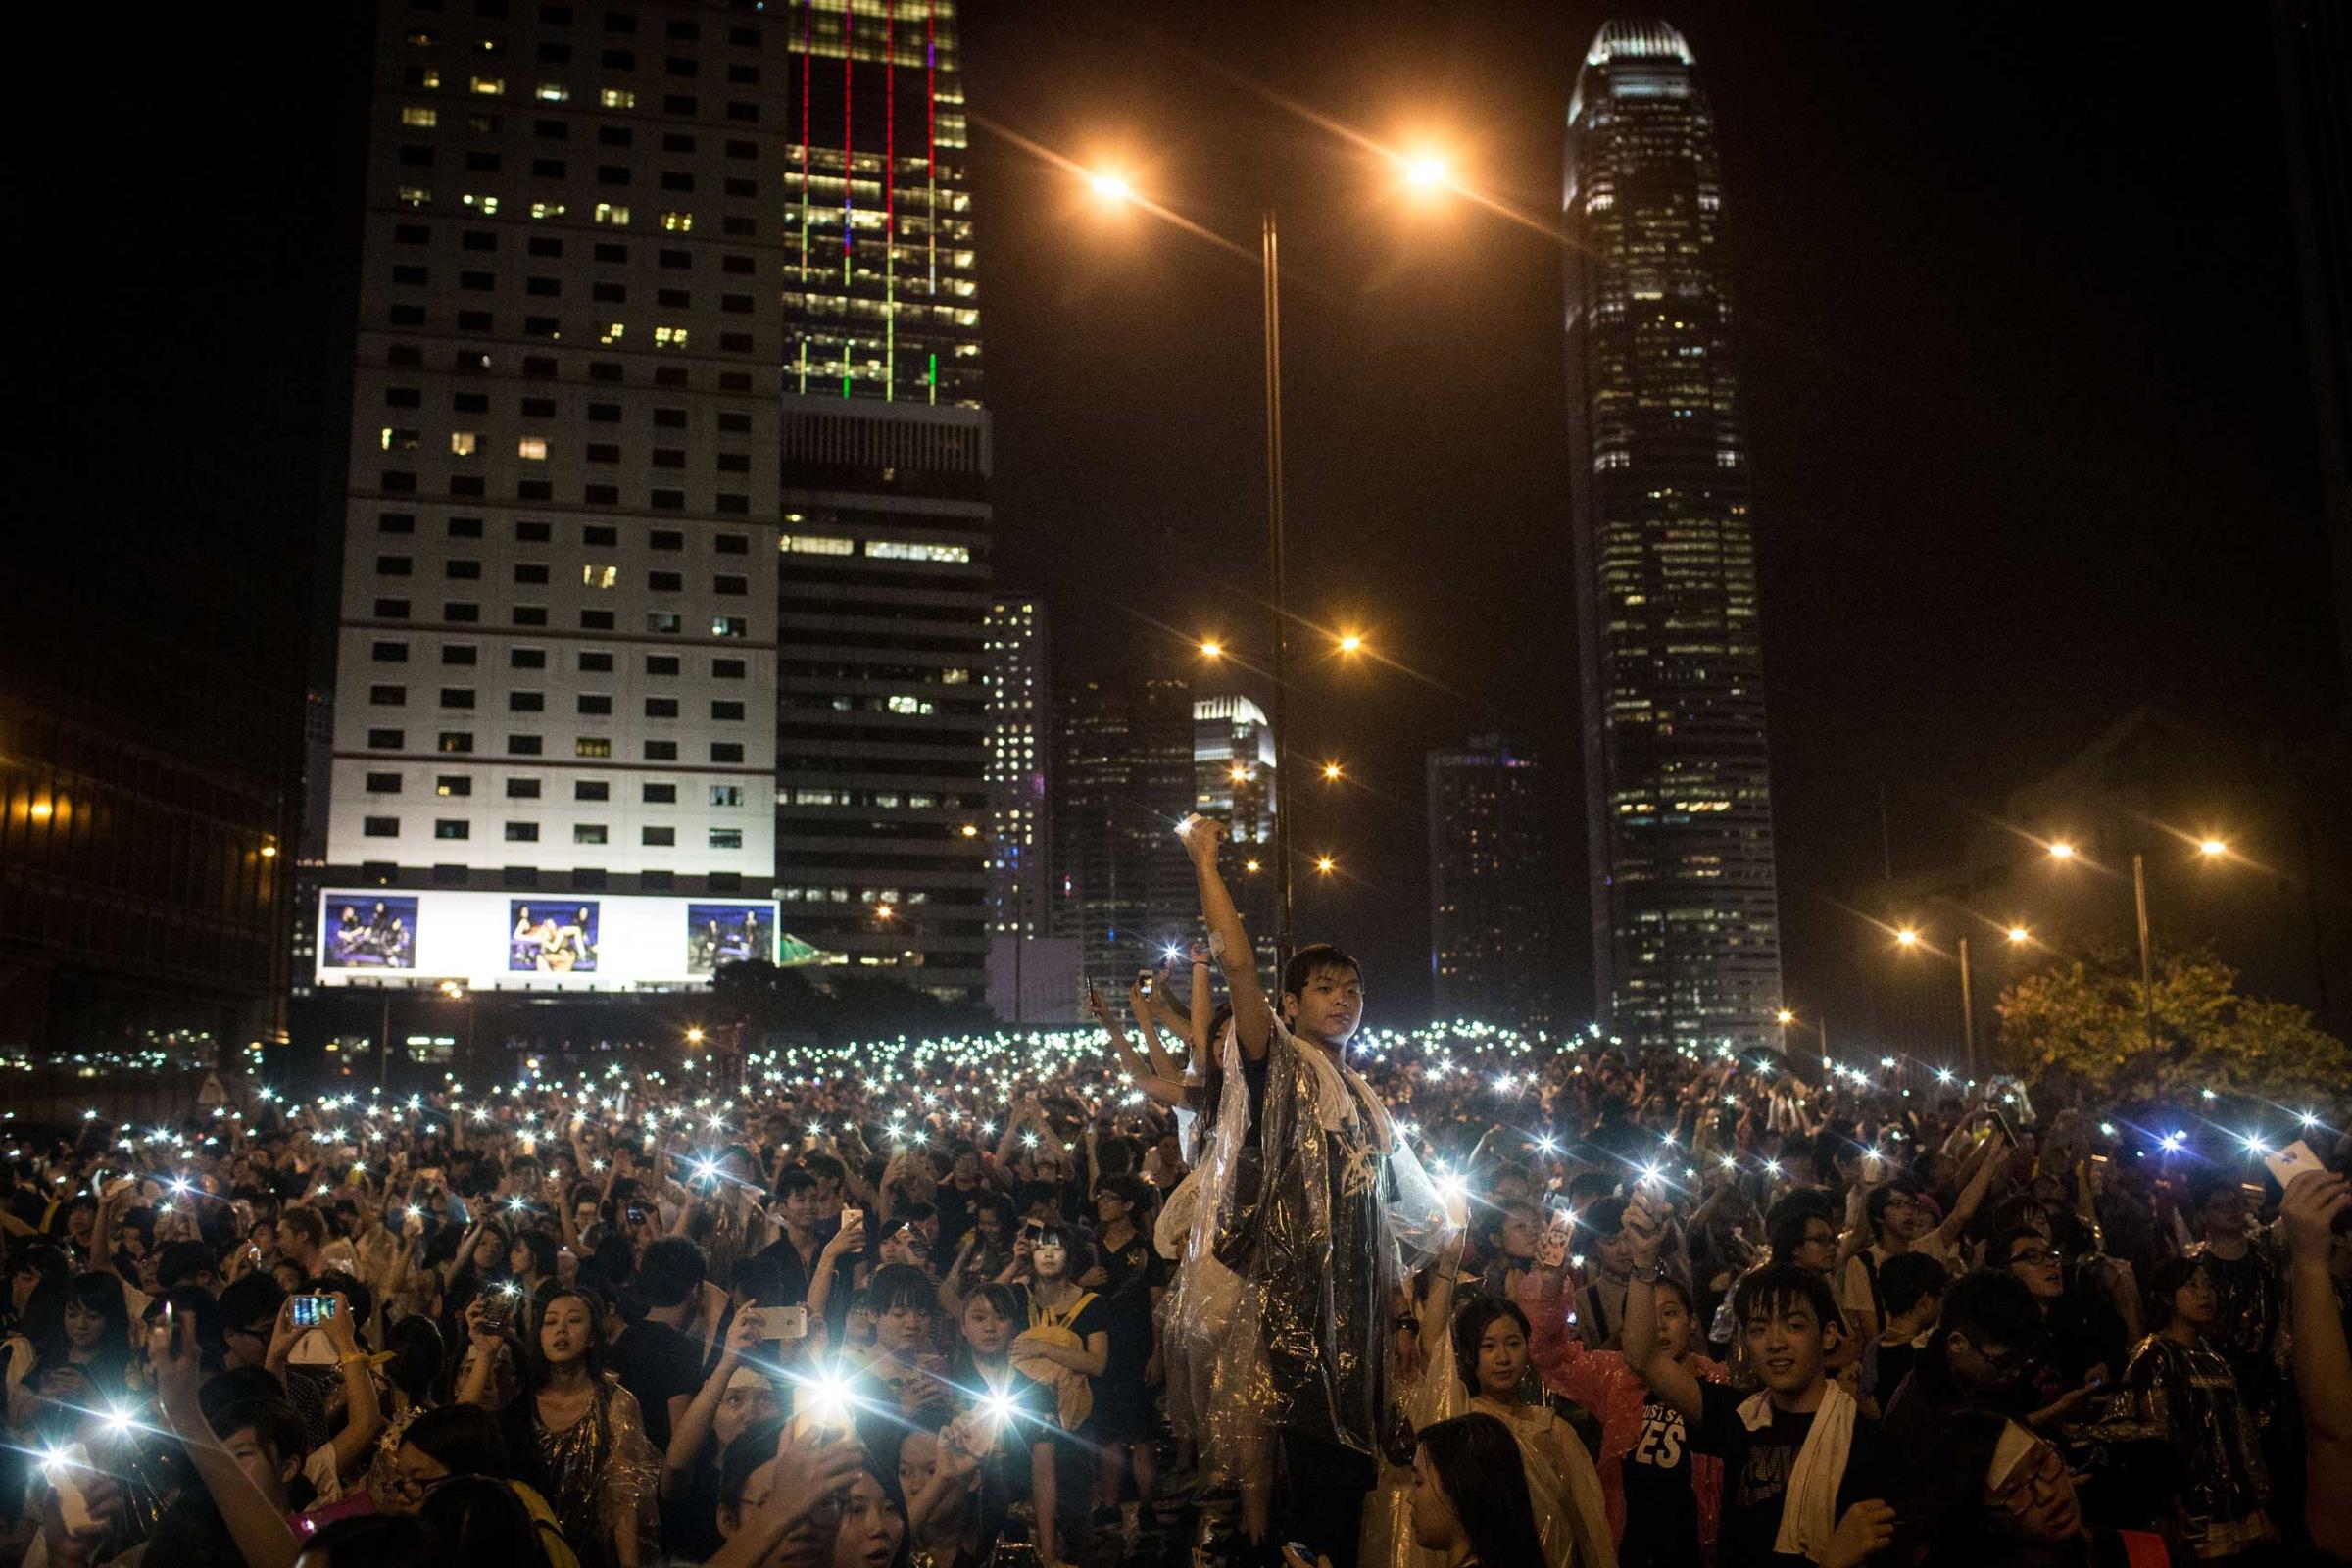 Protesters sing songs and wave their cell phones in the air after a massive thunderstorm passed over outside the Hong Kong Government Complex on Sept. 30, 2014 in Hong Kong, Hong Kong.